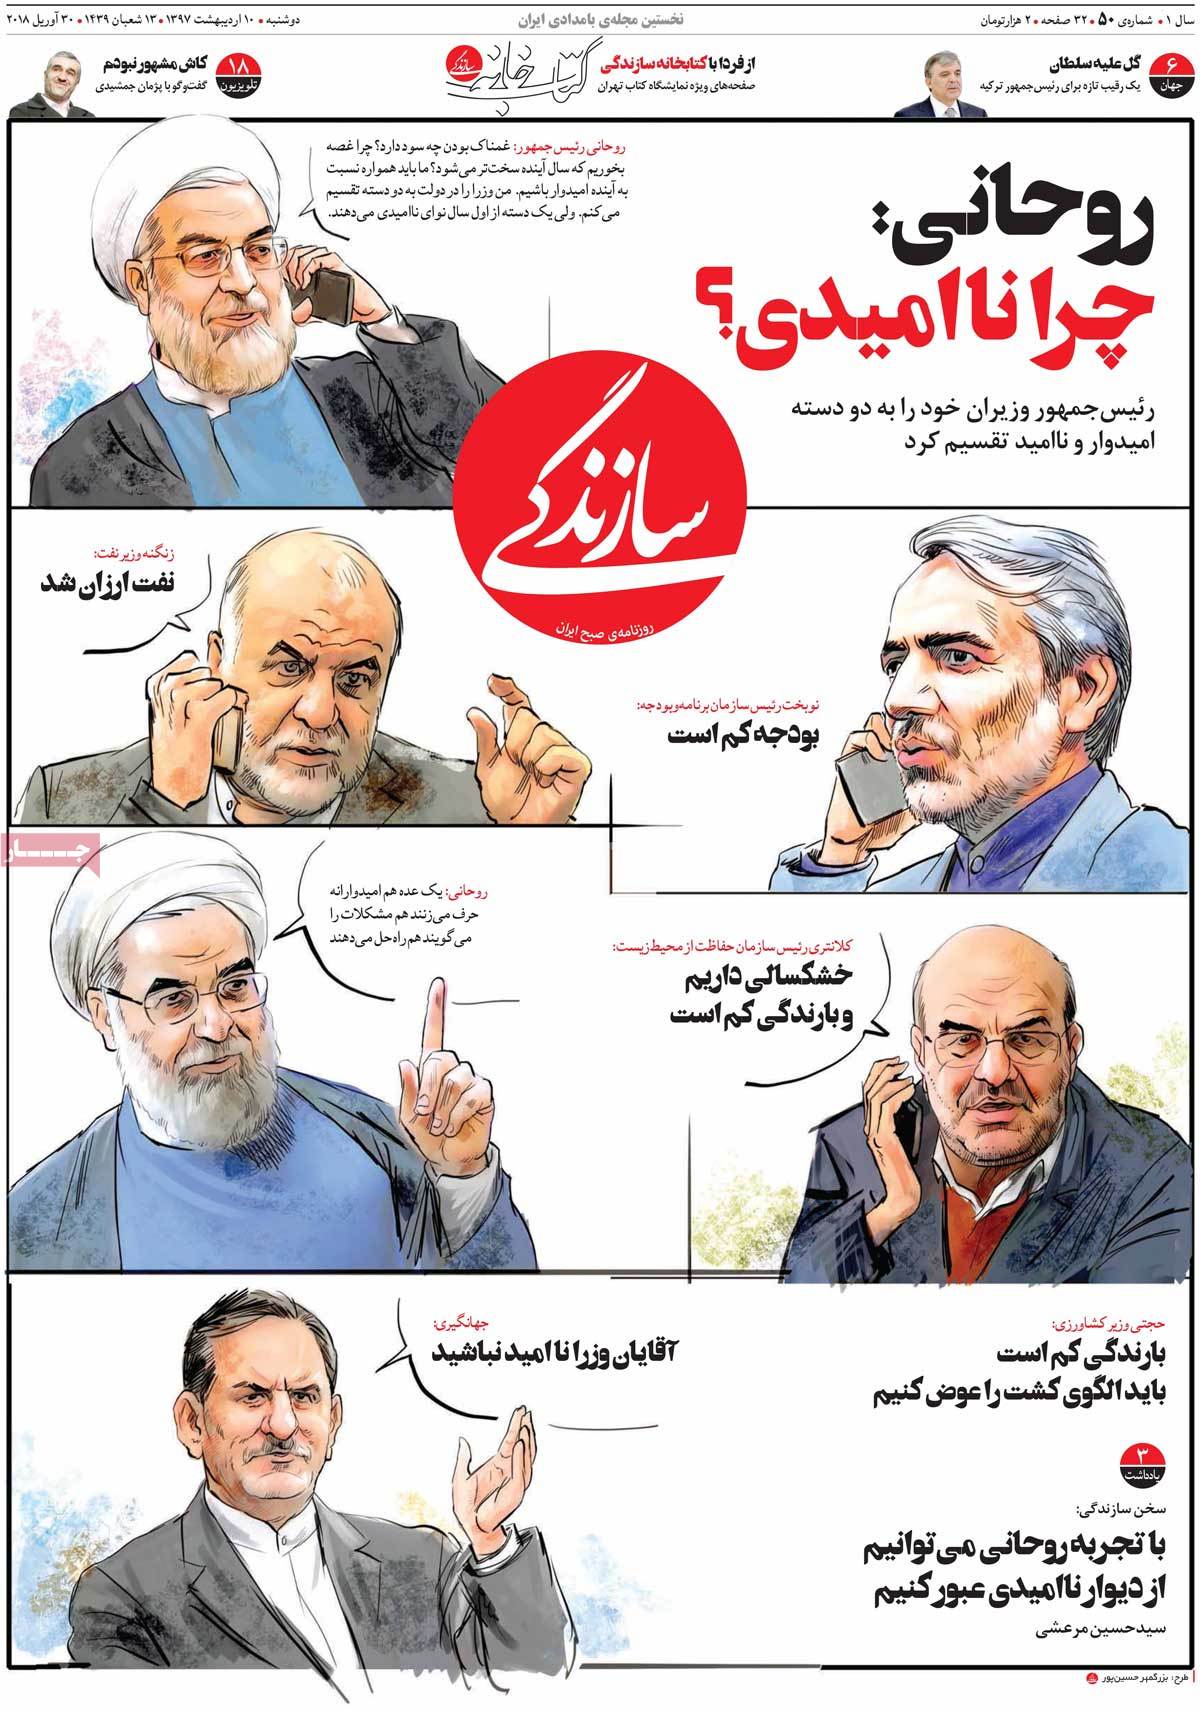 A Look at Iranian Newspaper Front Pages on April 30